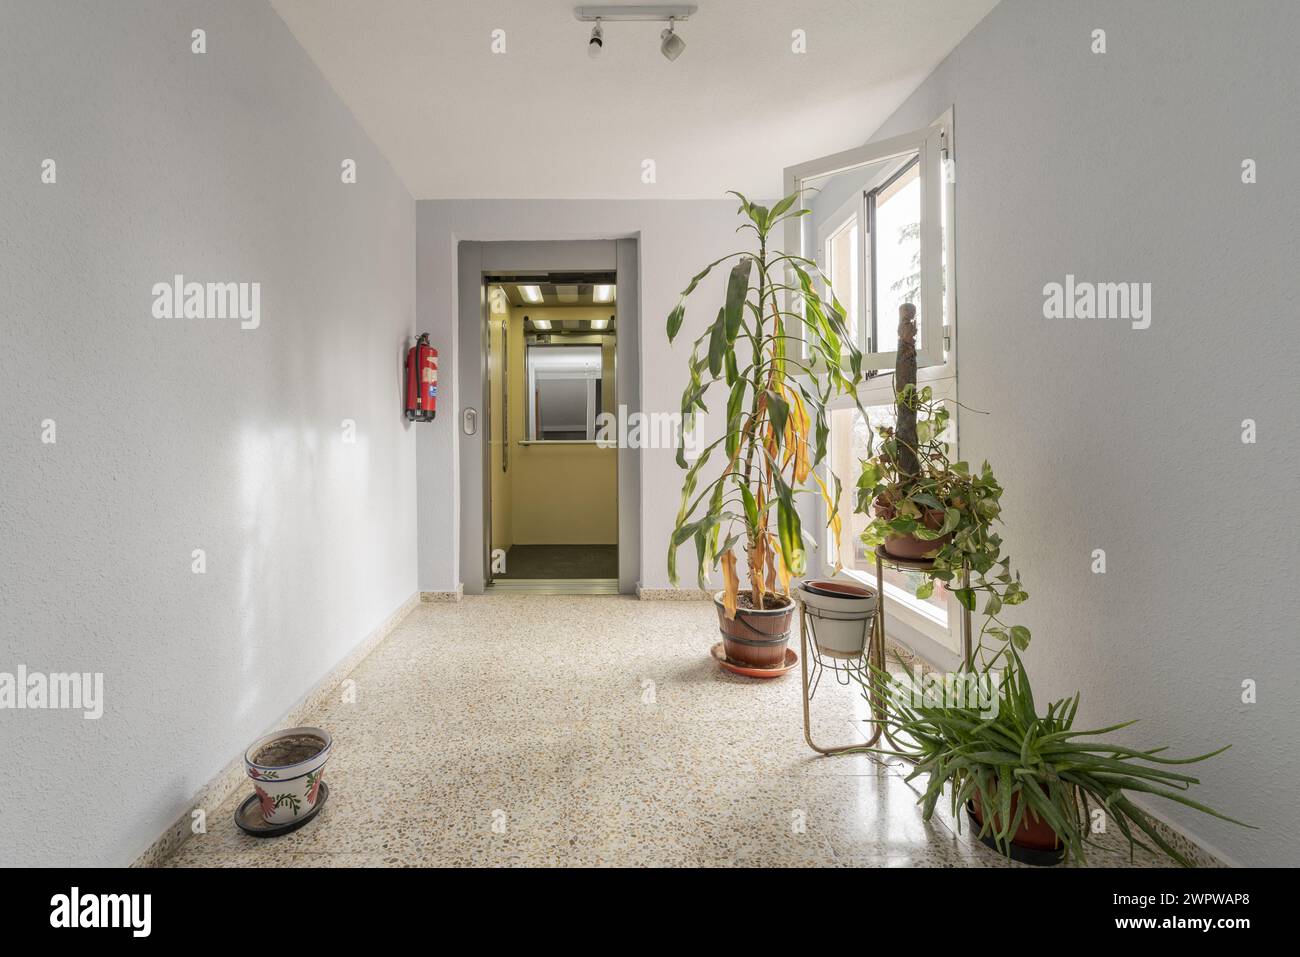 Landing of a residential building with open elevator door, terrazzo floors and some green plants Stock Photo